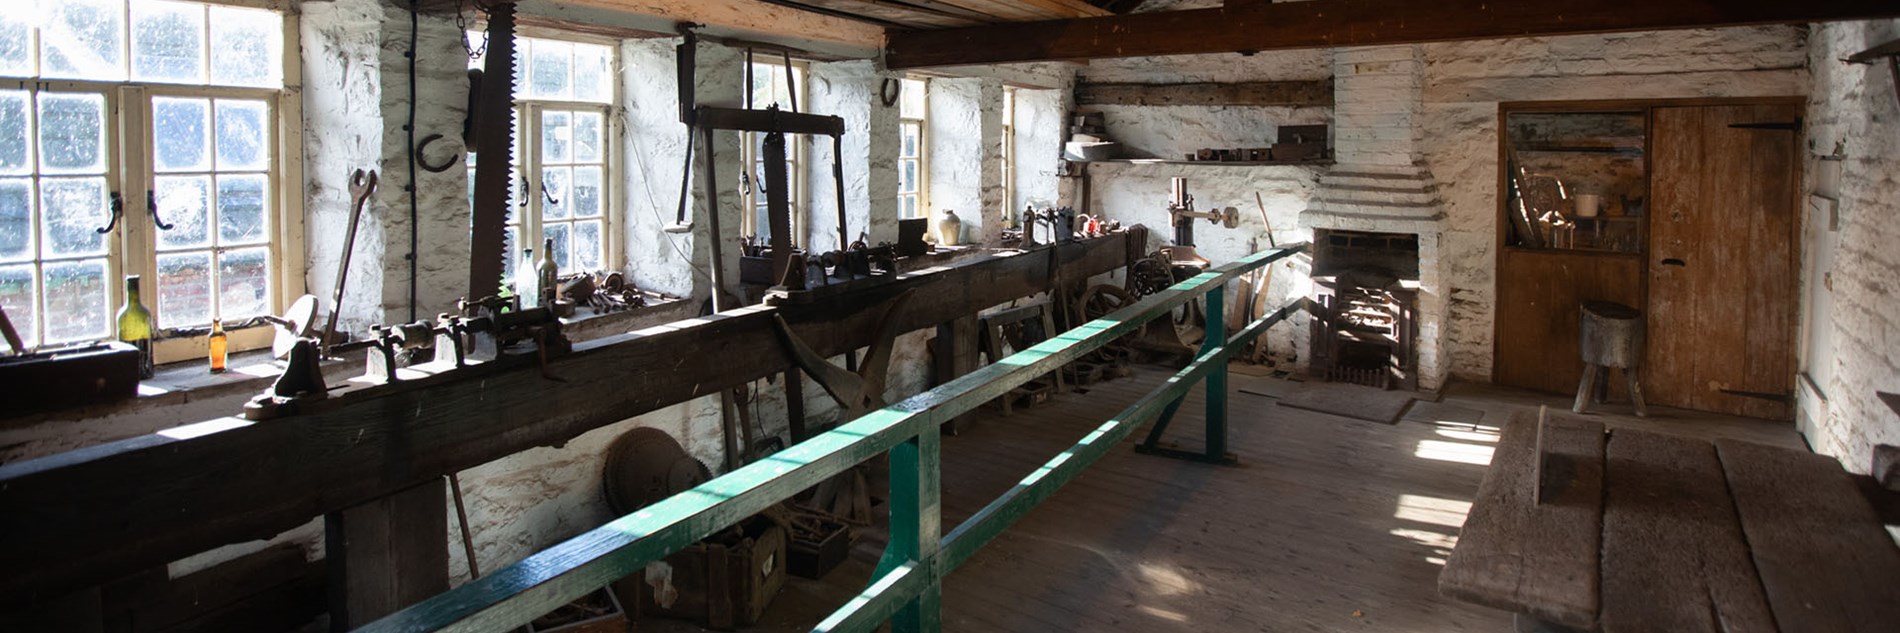 Looking along an old whitewashed workshop with three boring machines mounted on benching backlit by windows. An open fireplace and chimney breast are at the end of the room.